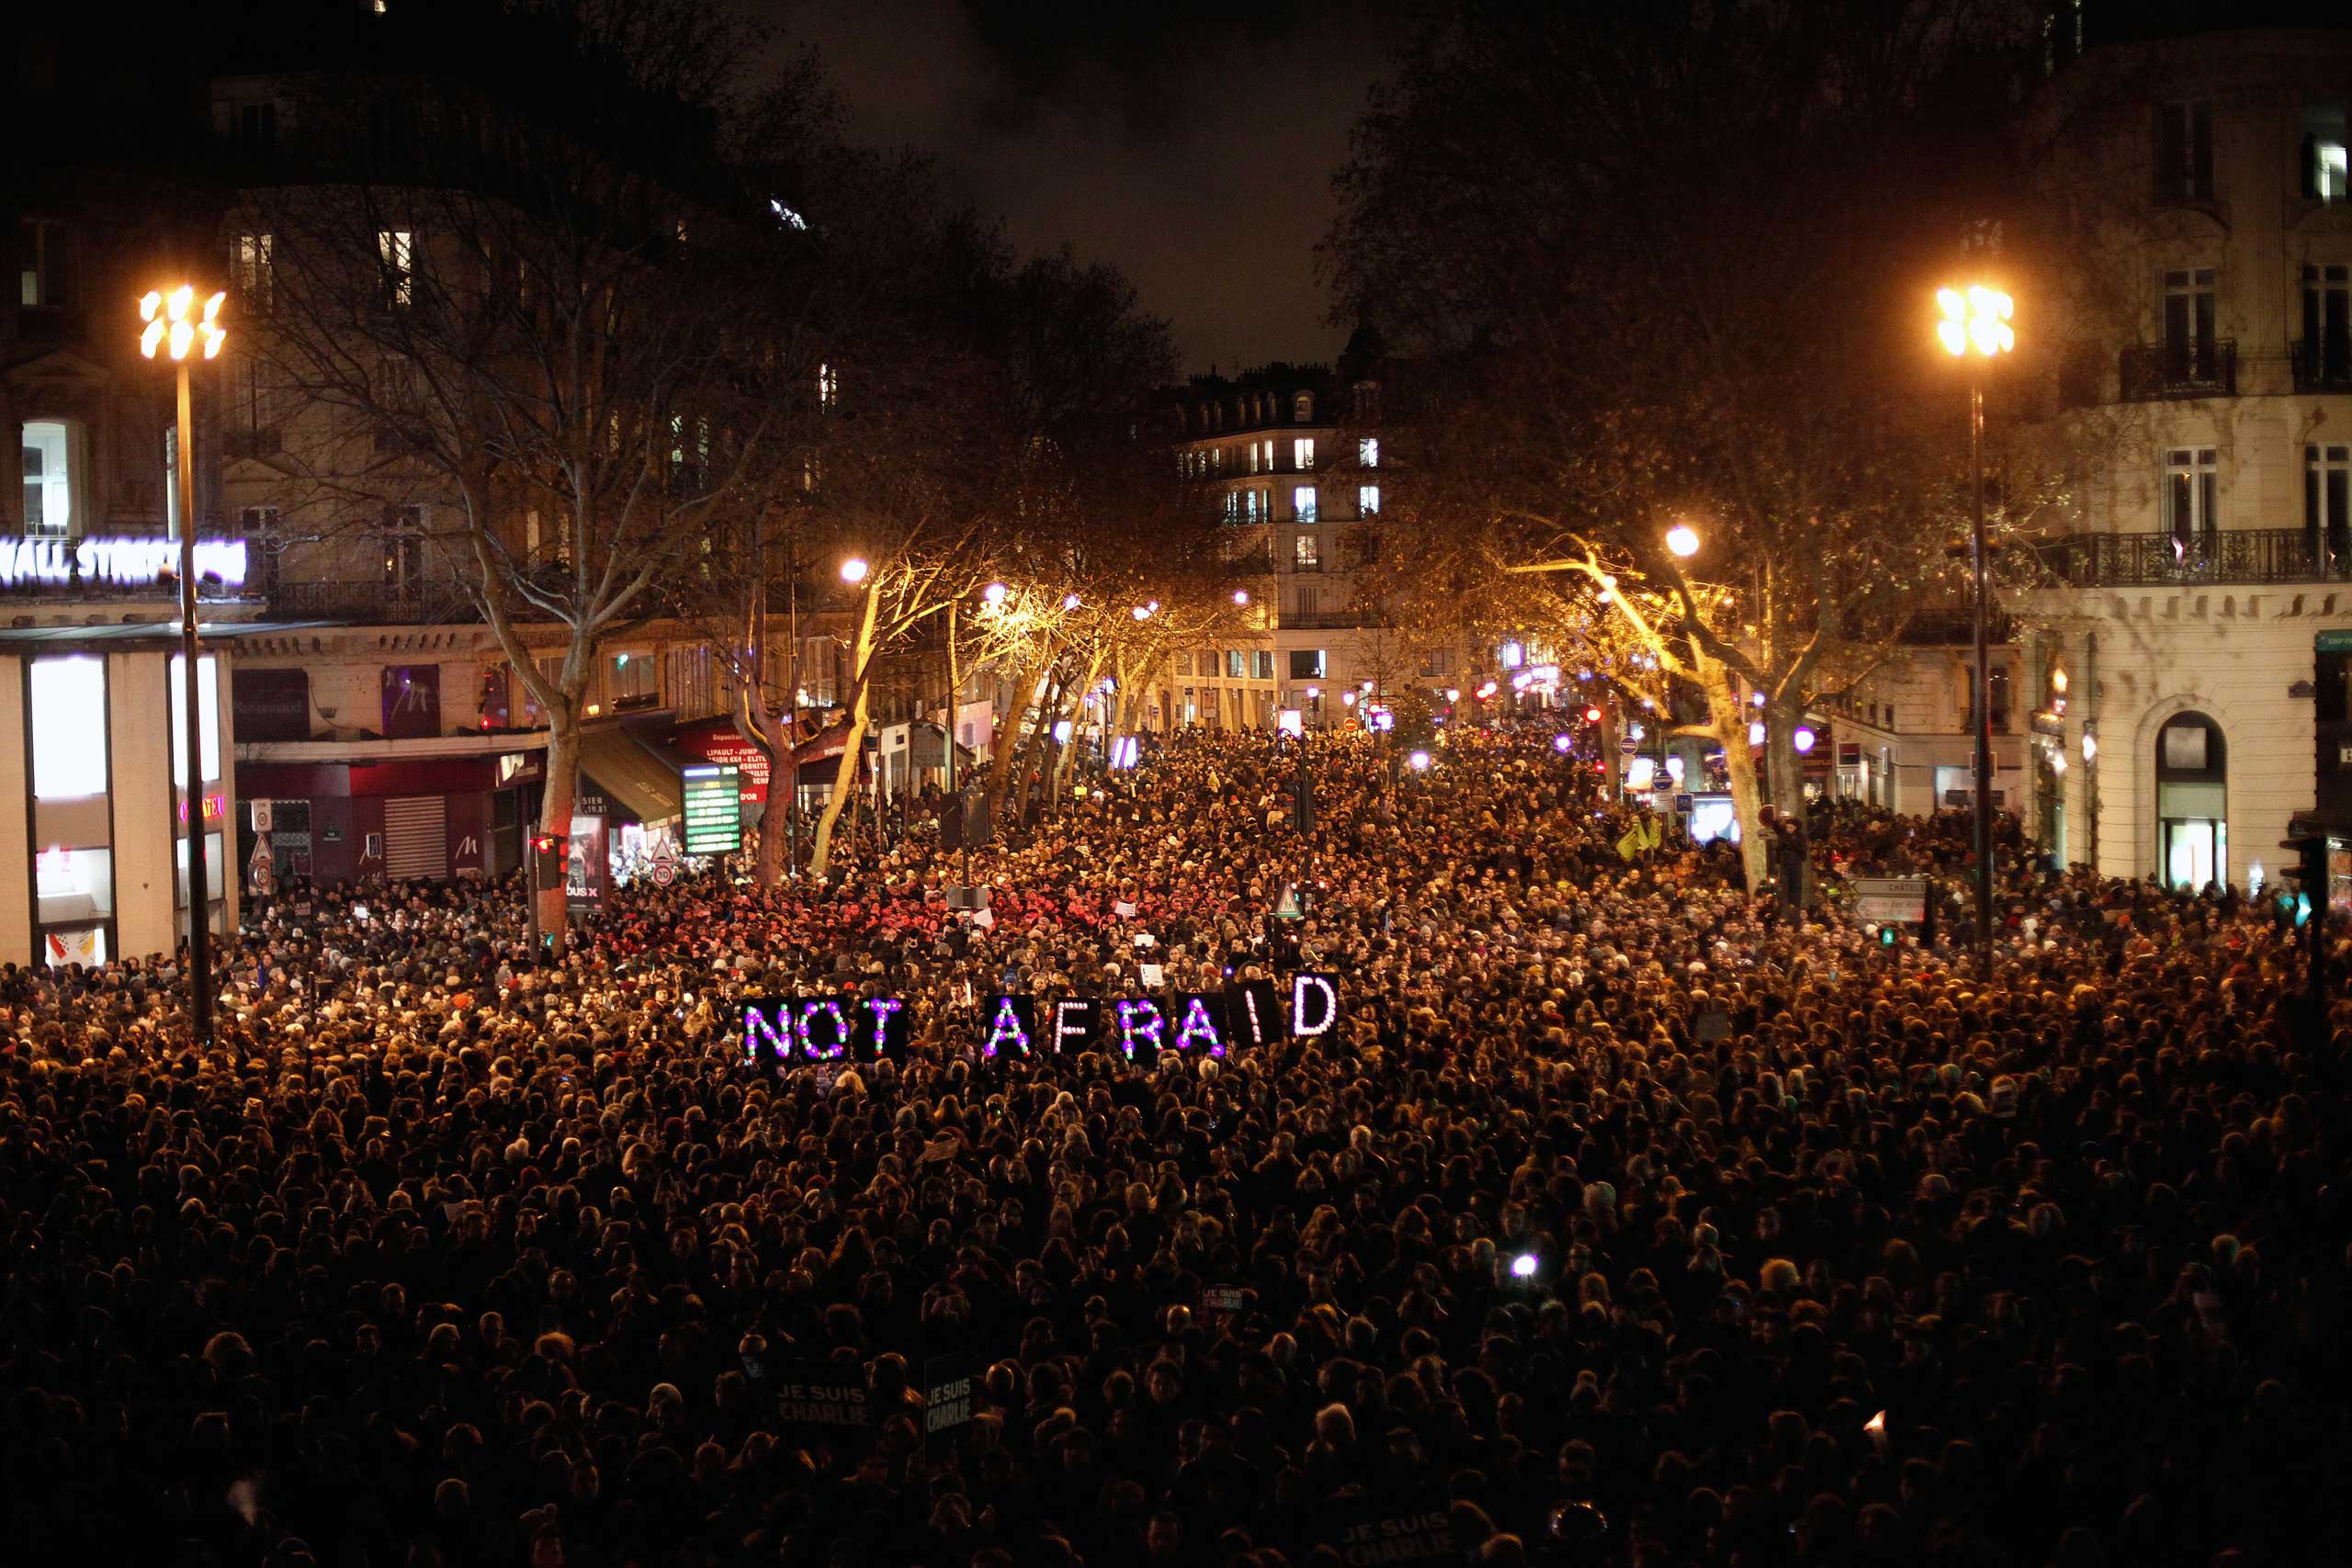 People gather to pay respect for the victims of a terror attack against a satirical newspaper, in Paris on Jan. 7, 2015. (Thibault Camus—AP)